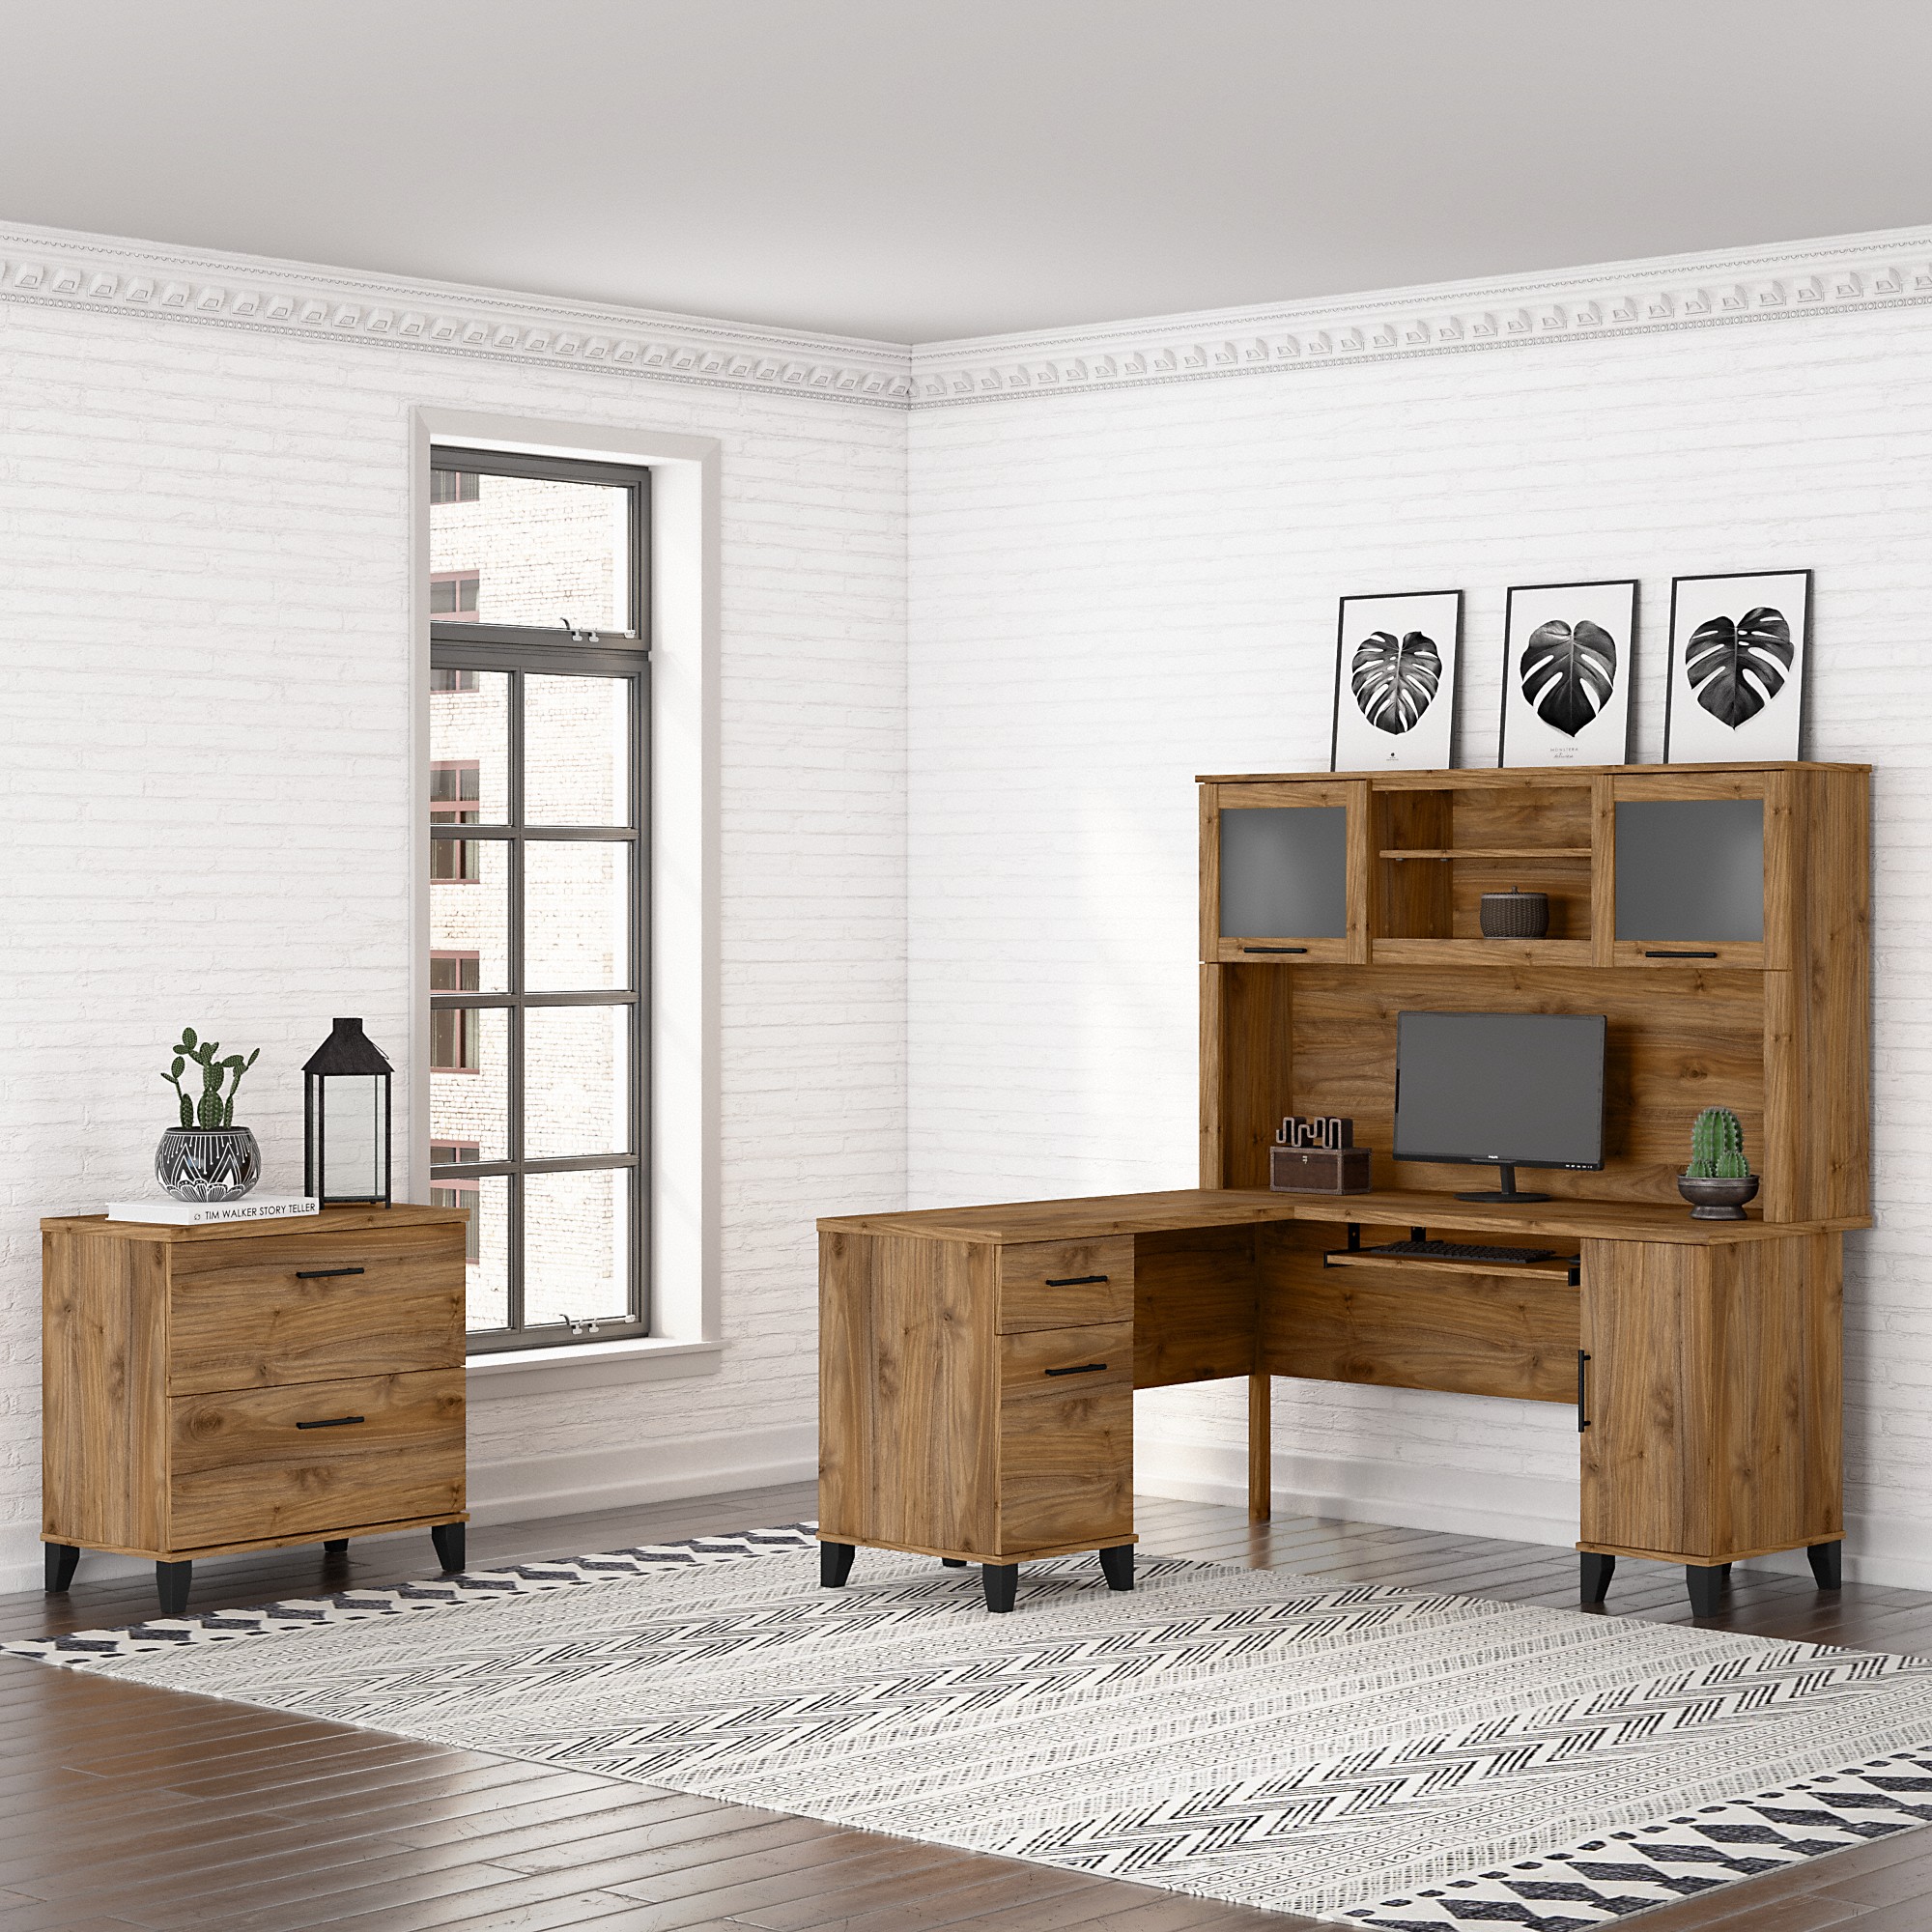 Bush Furniture Somerset 60 in 2-Door Hutch with Open Storage in Fresh Walnut - fits on Somerset 60 in L Desk (Sold Separately) - image 3 of 7